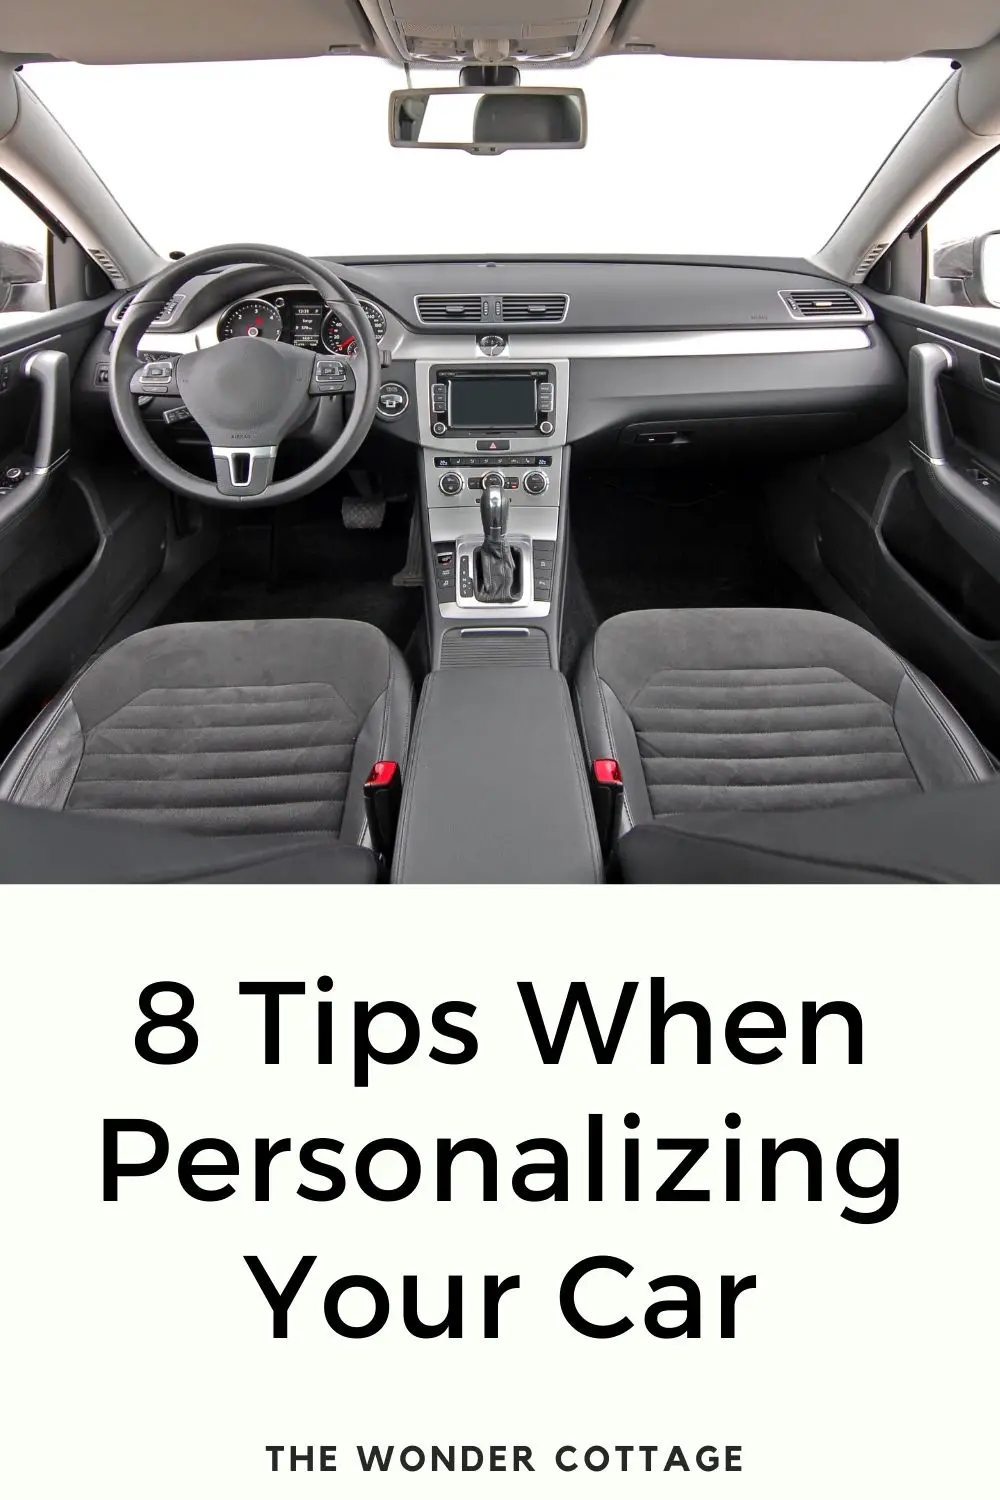 8 tips when personalizing your car